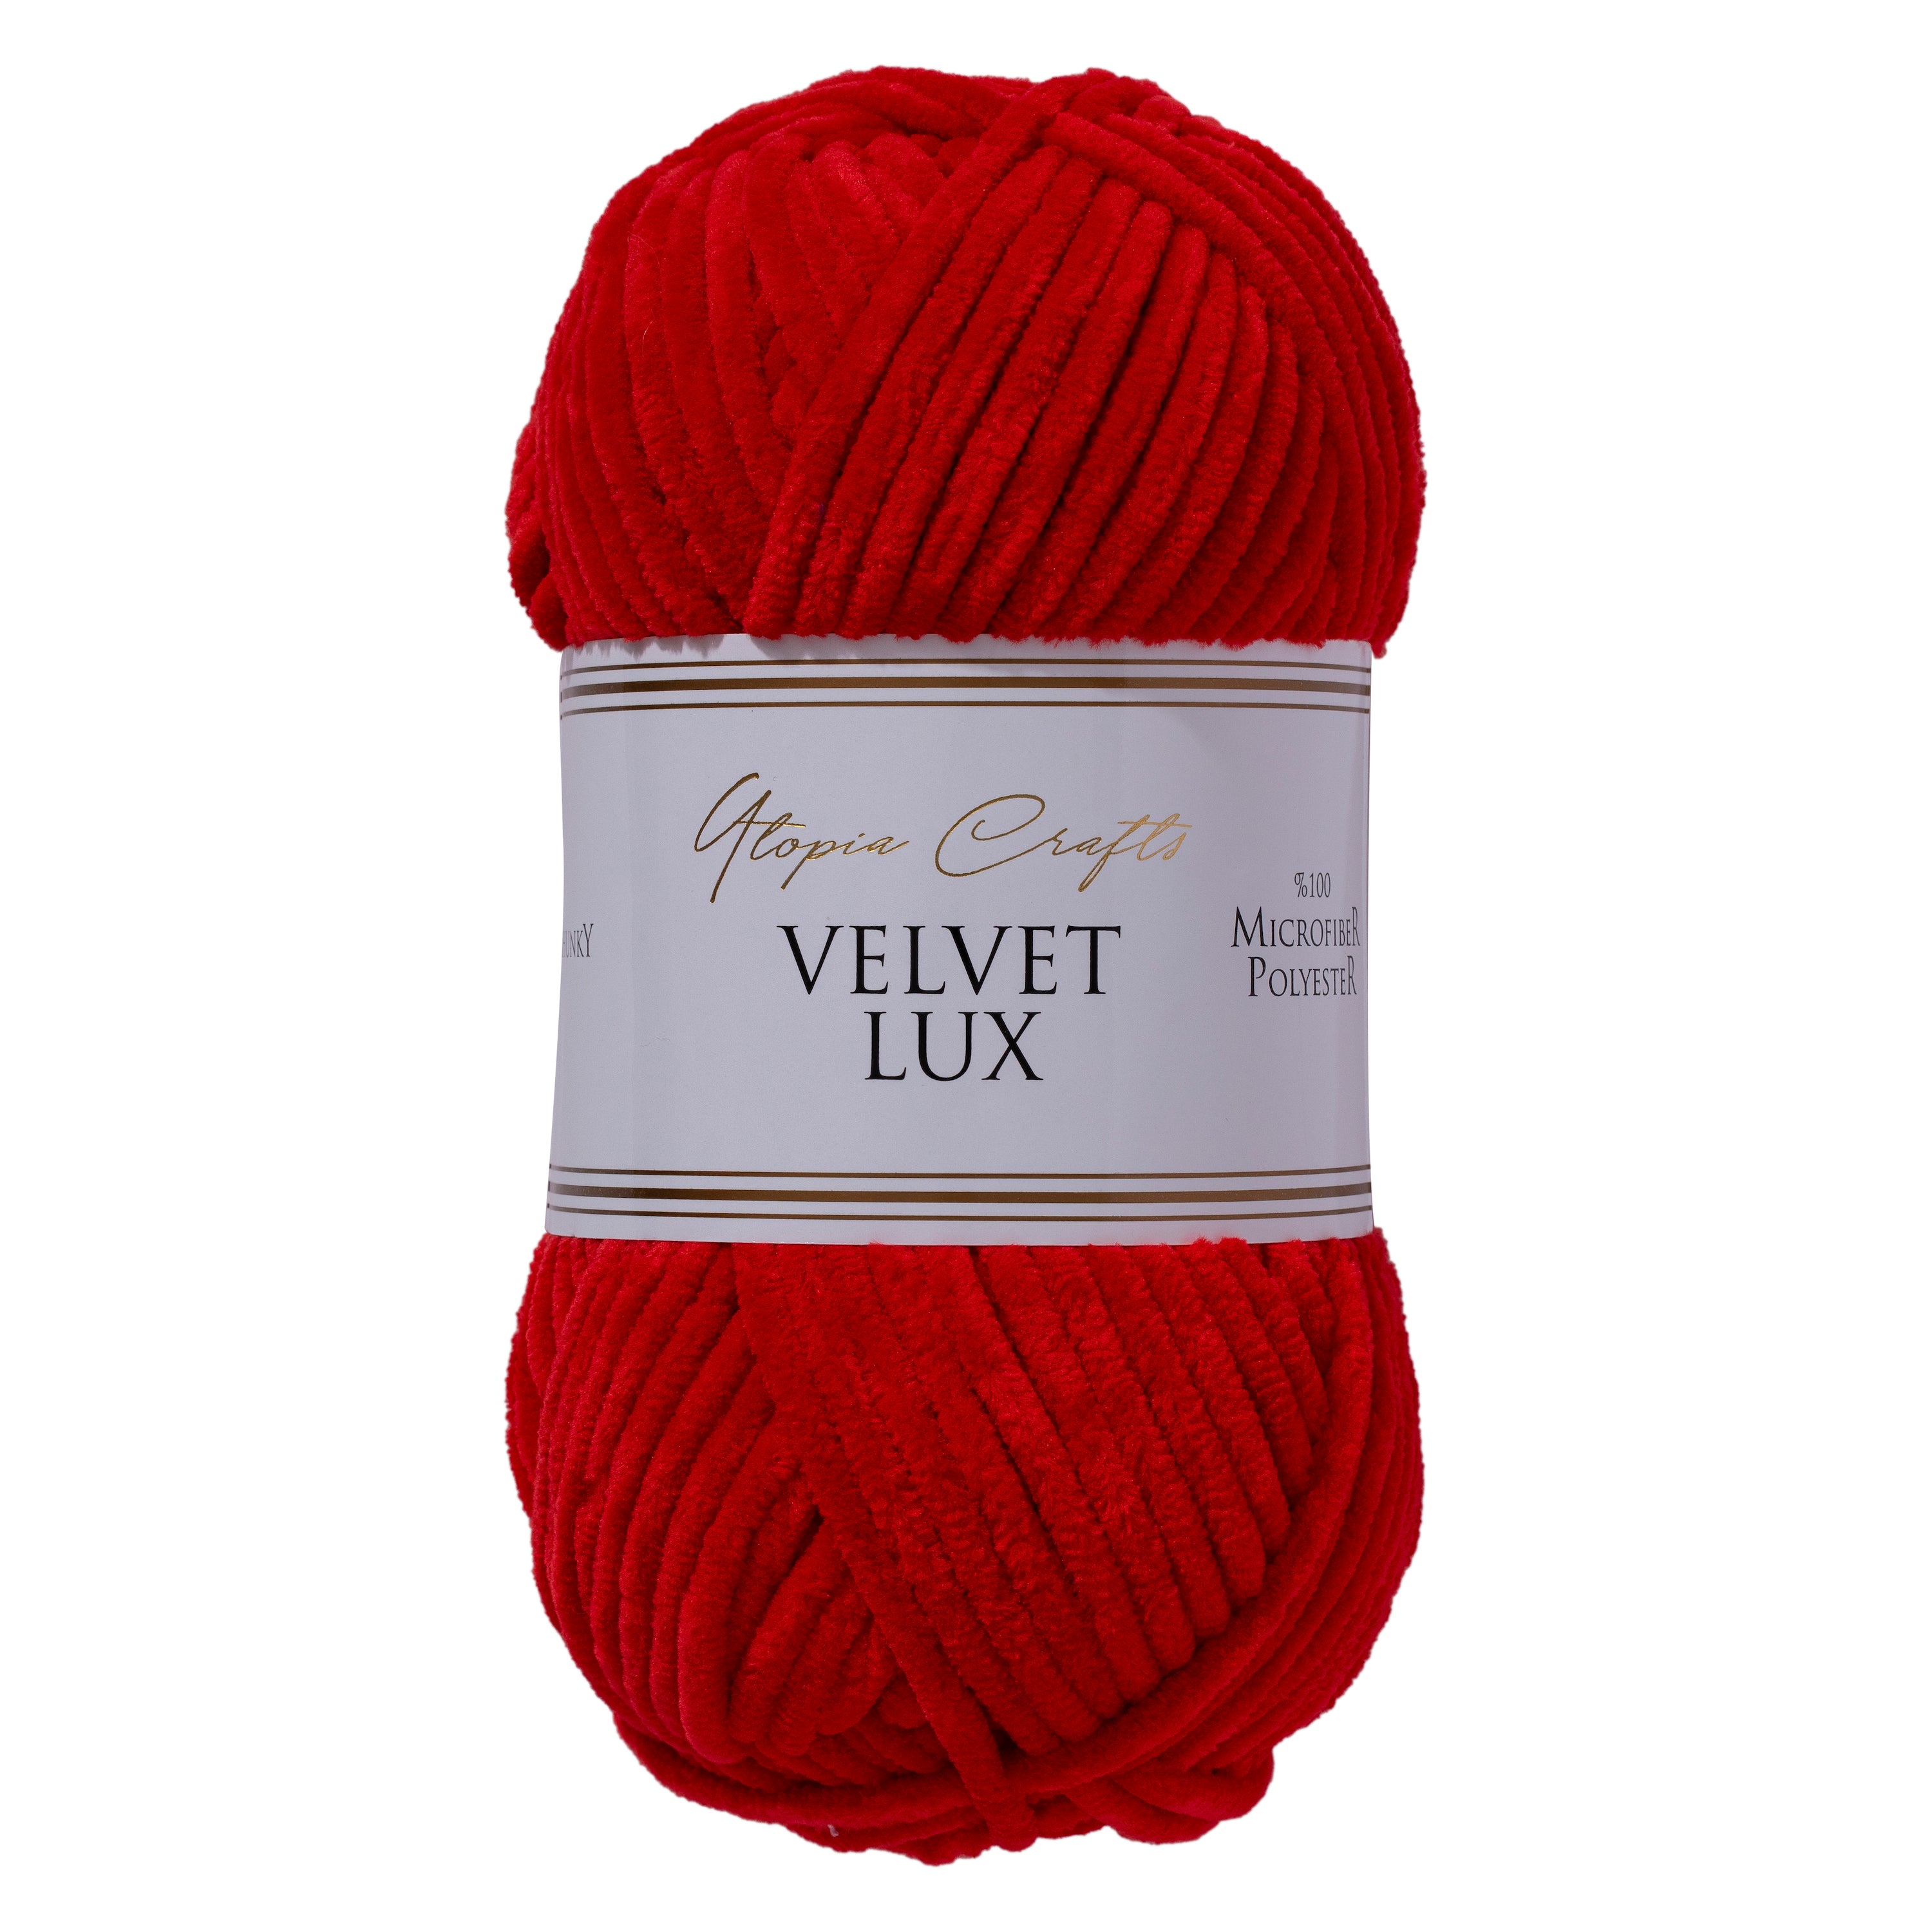 Utopia Crafts Velvet Lux Chenille Super Soft Chunky Yarn for Knitting and Crochet, 100g - 110m (Red)